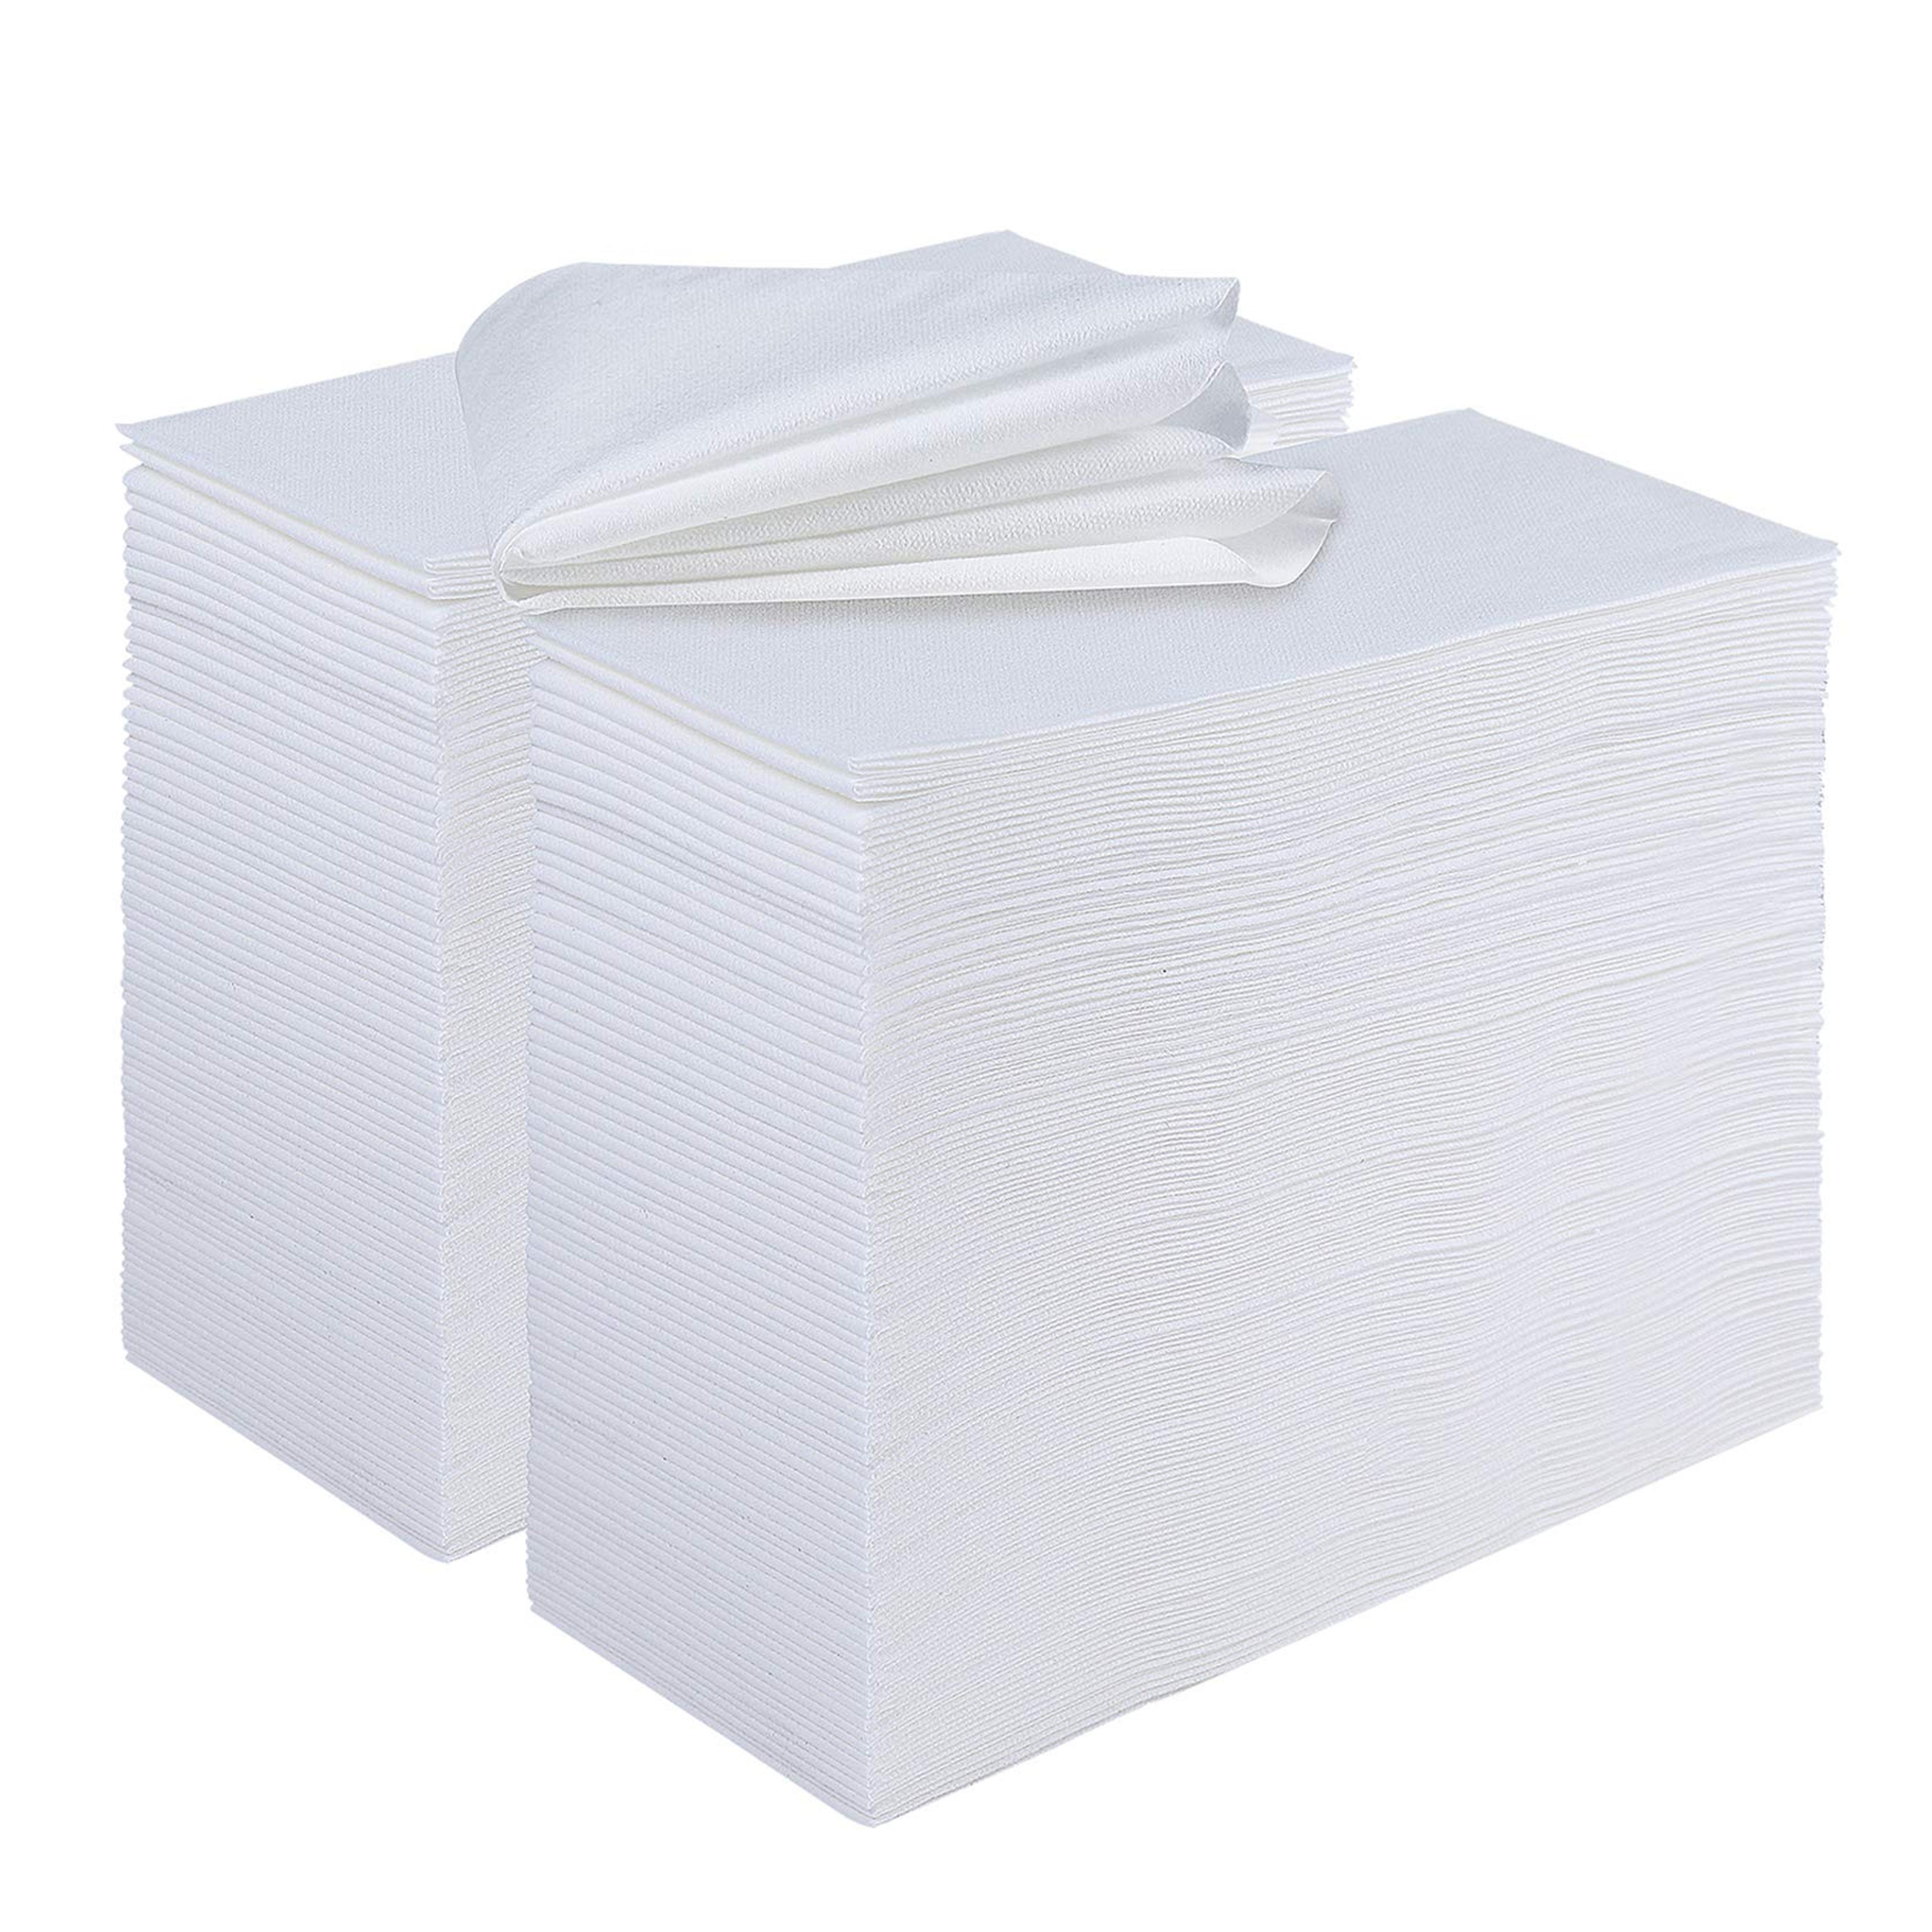 [480 Pack] FOCUSLINE Disposable Bathroom Napkins, Linen-Feel Guest Towels, Soft and Absorbent Disposable Paper Hand Towels for Dinner, Wedding Event, Parties, White